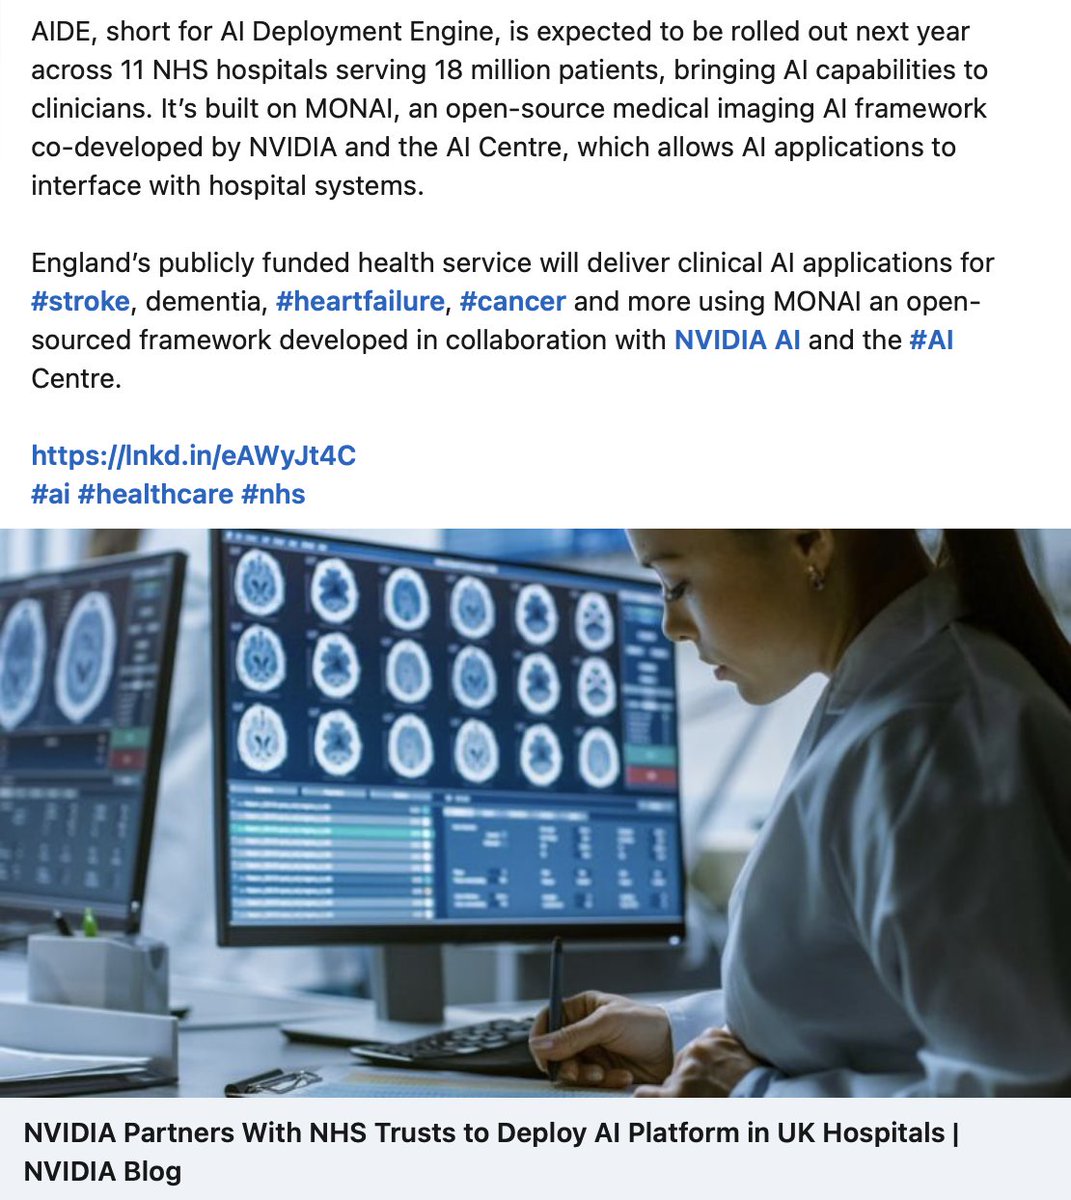 A consortium of 10 @NHSEnglandLDN Trusts deploying the MONAI-based AIDE platform providing AI-enabled disease-detection tools to healthcare professionals & includes clinical AI applications for #stroke, dementia, #heartfailure, #cancer tinyurl.com/5t48p4wd